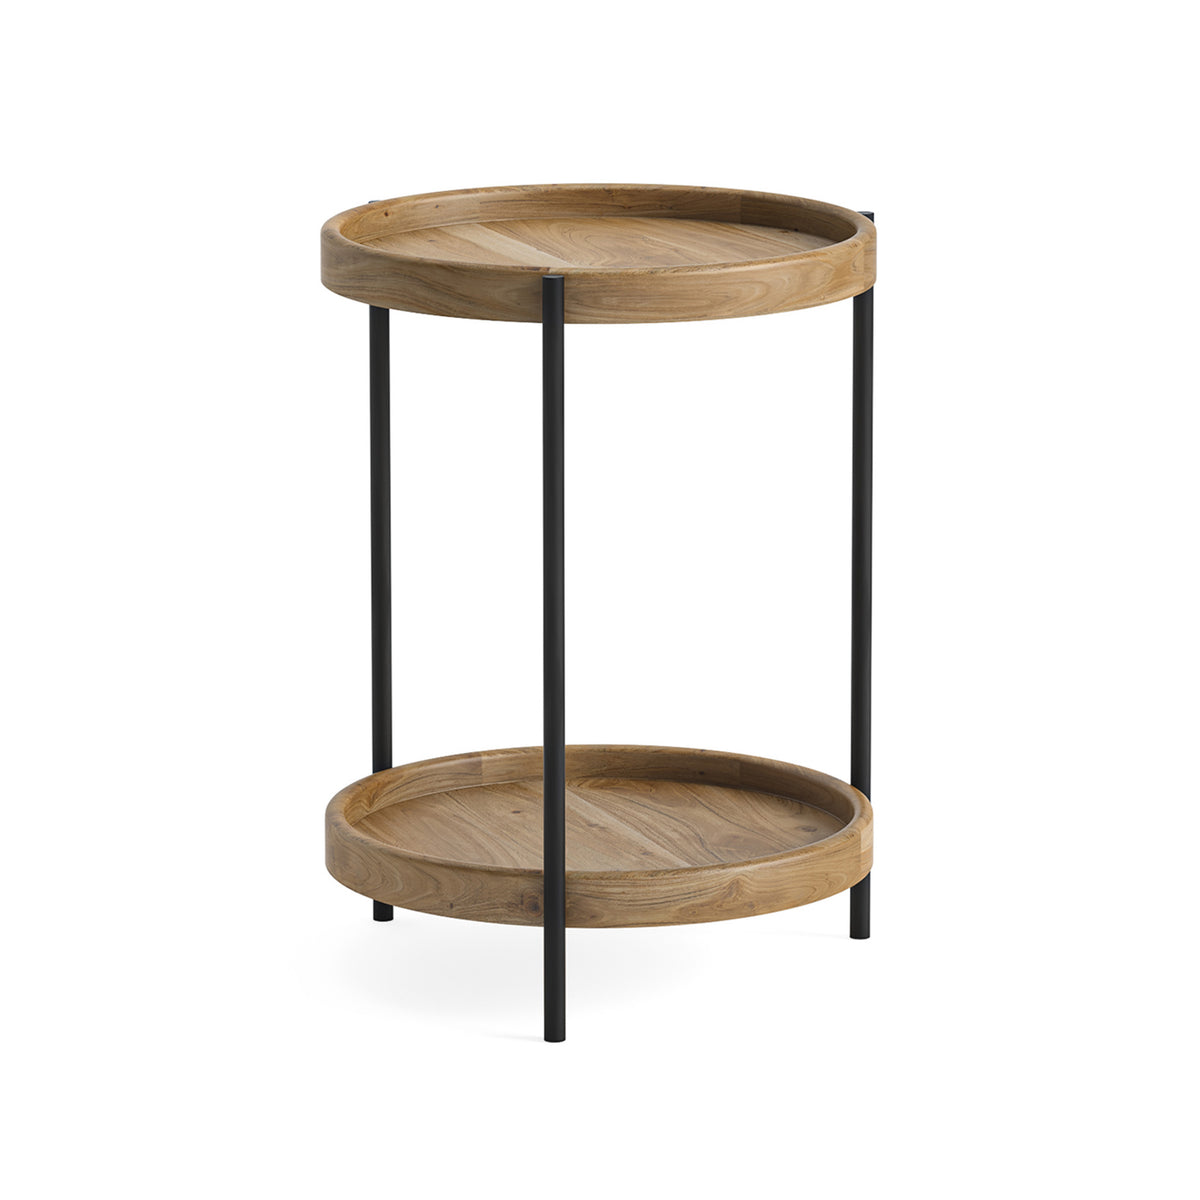 Lyra mango wooden natural 2 tier side table from Roseland furniture